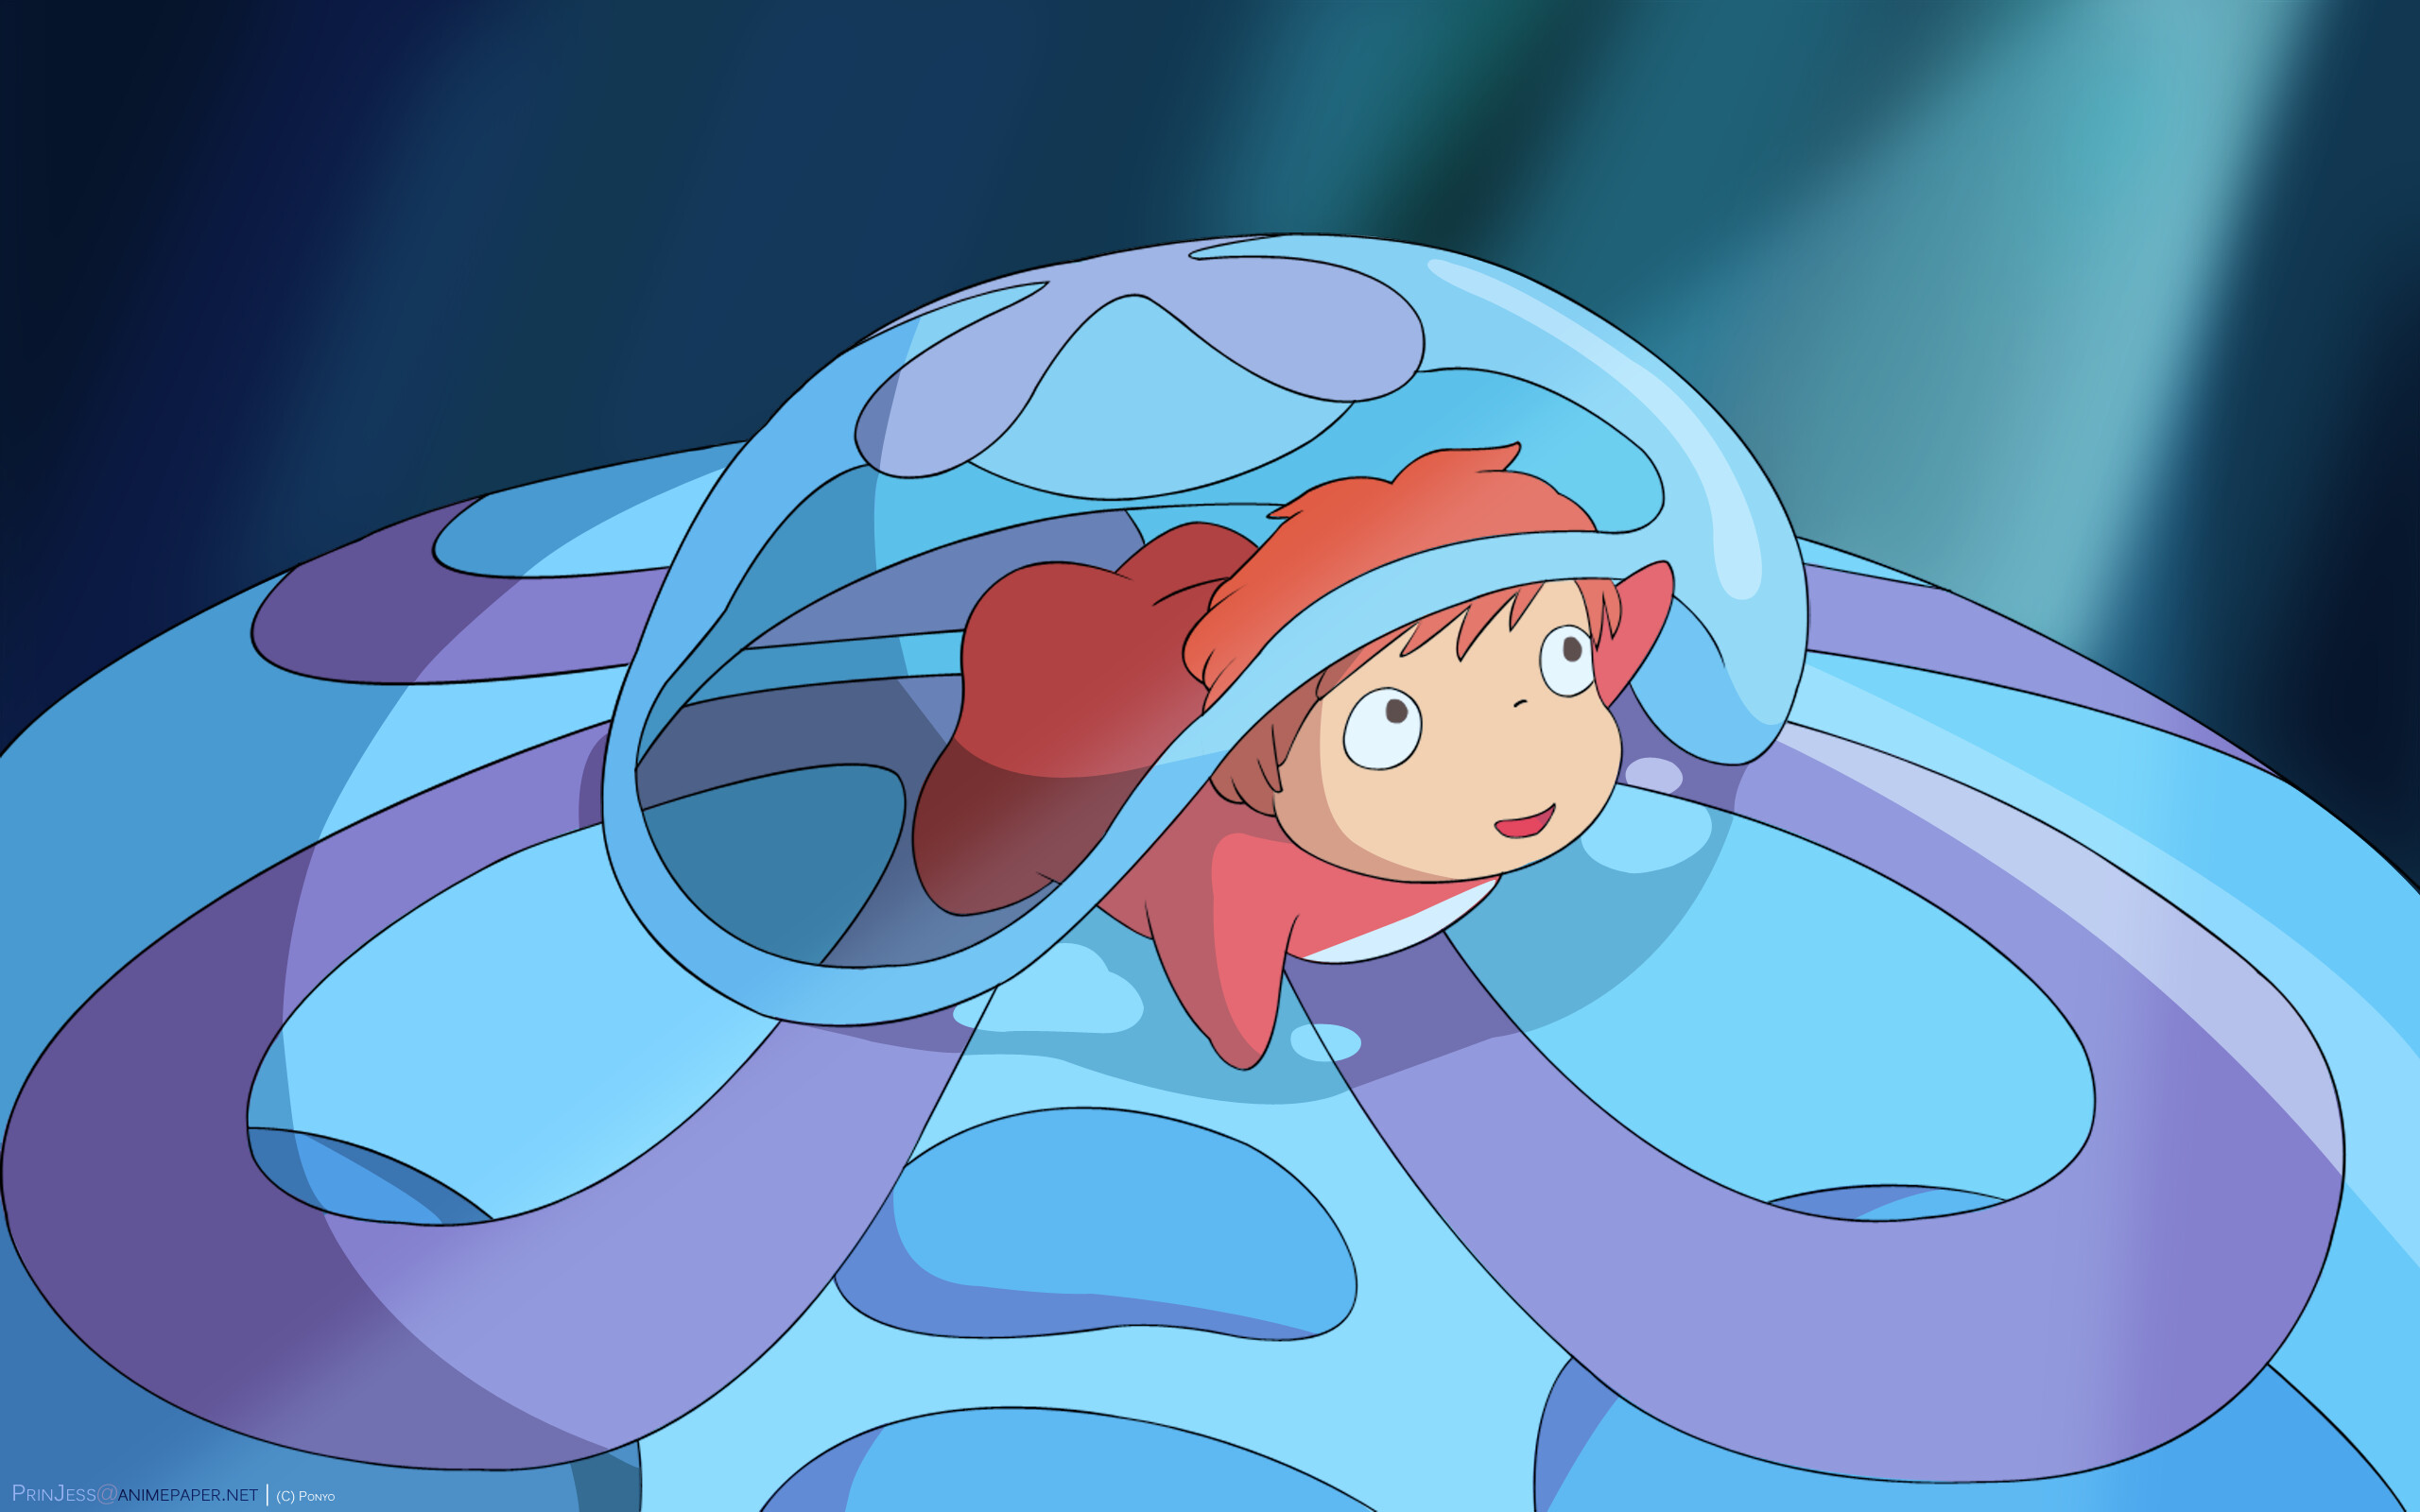 Ponyo: The story of a goldfish who escapes from the ocean and is rescued by a five-year-old human boy, Anime. 2560x1600 HD Wallpaper.